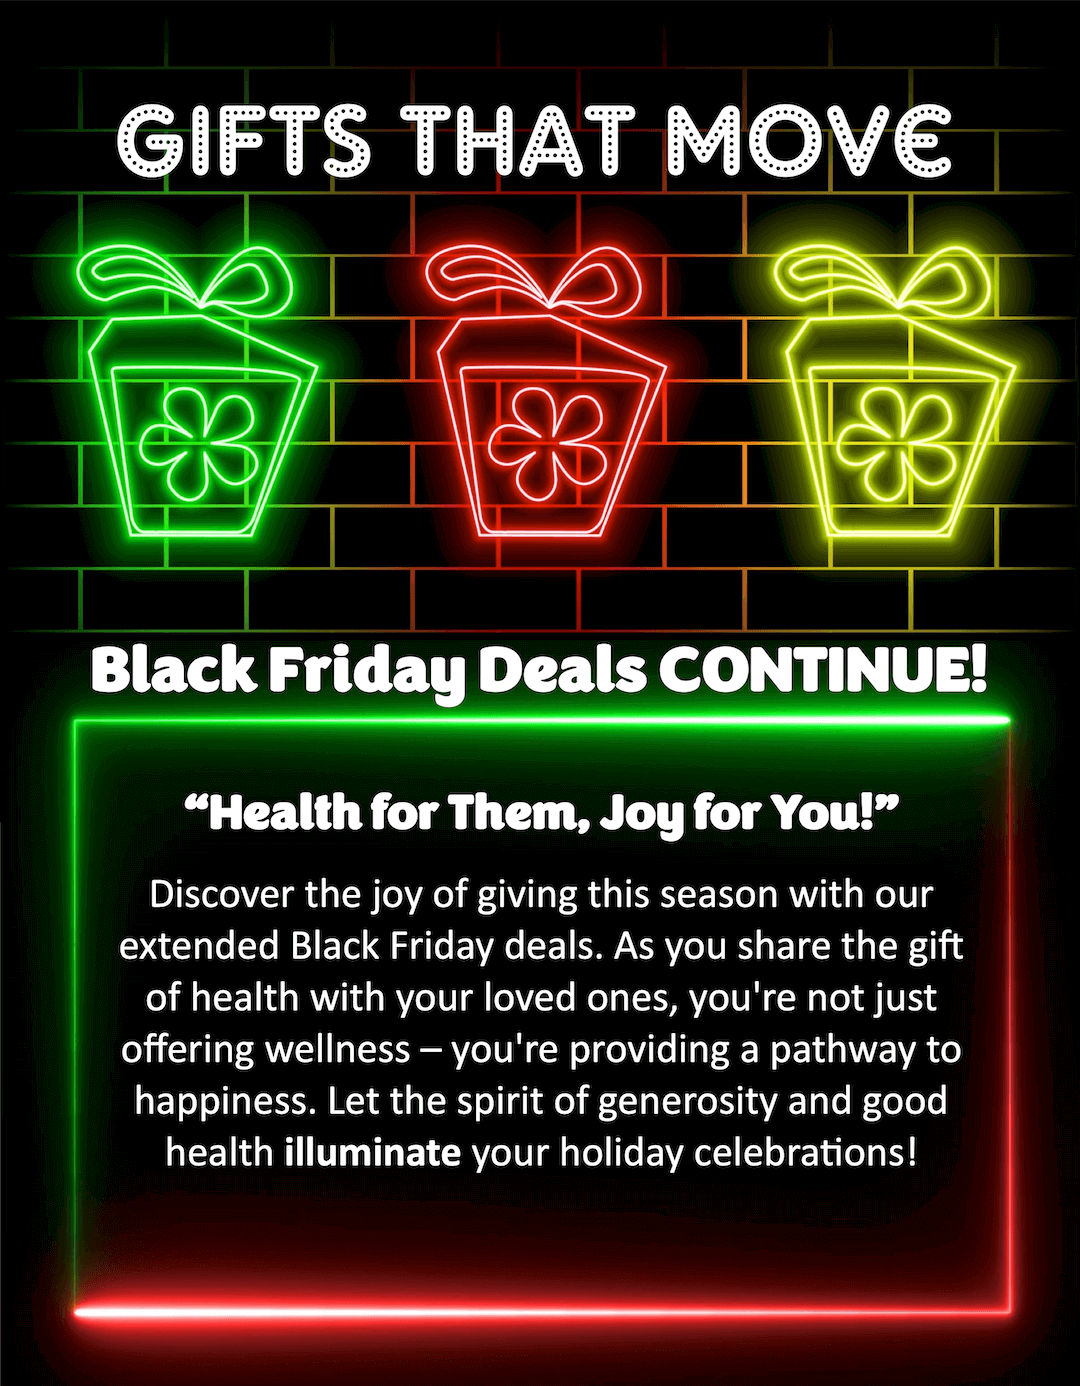 Black Friday Deals continue for the holidays at The Club Kona